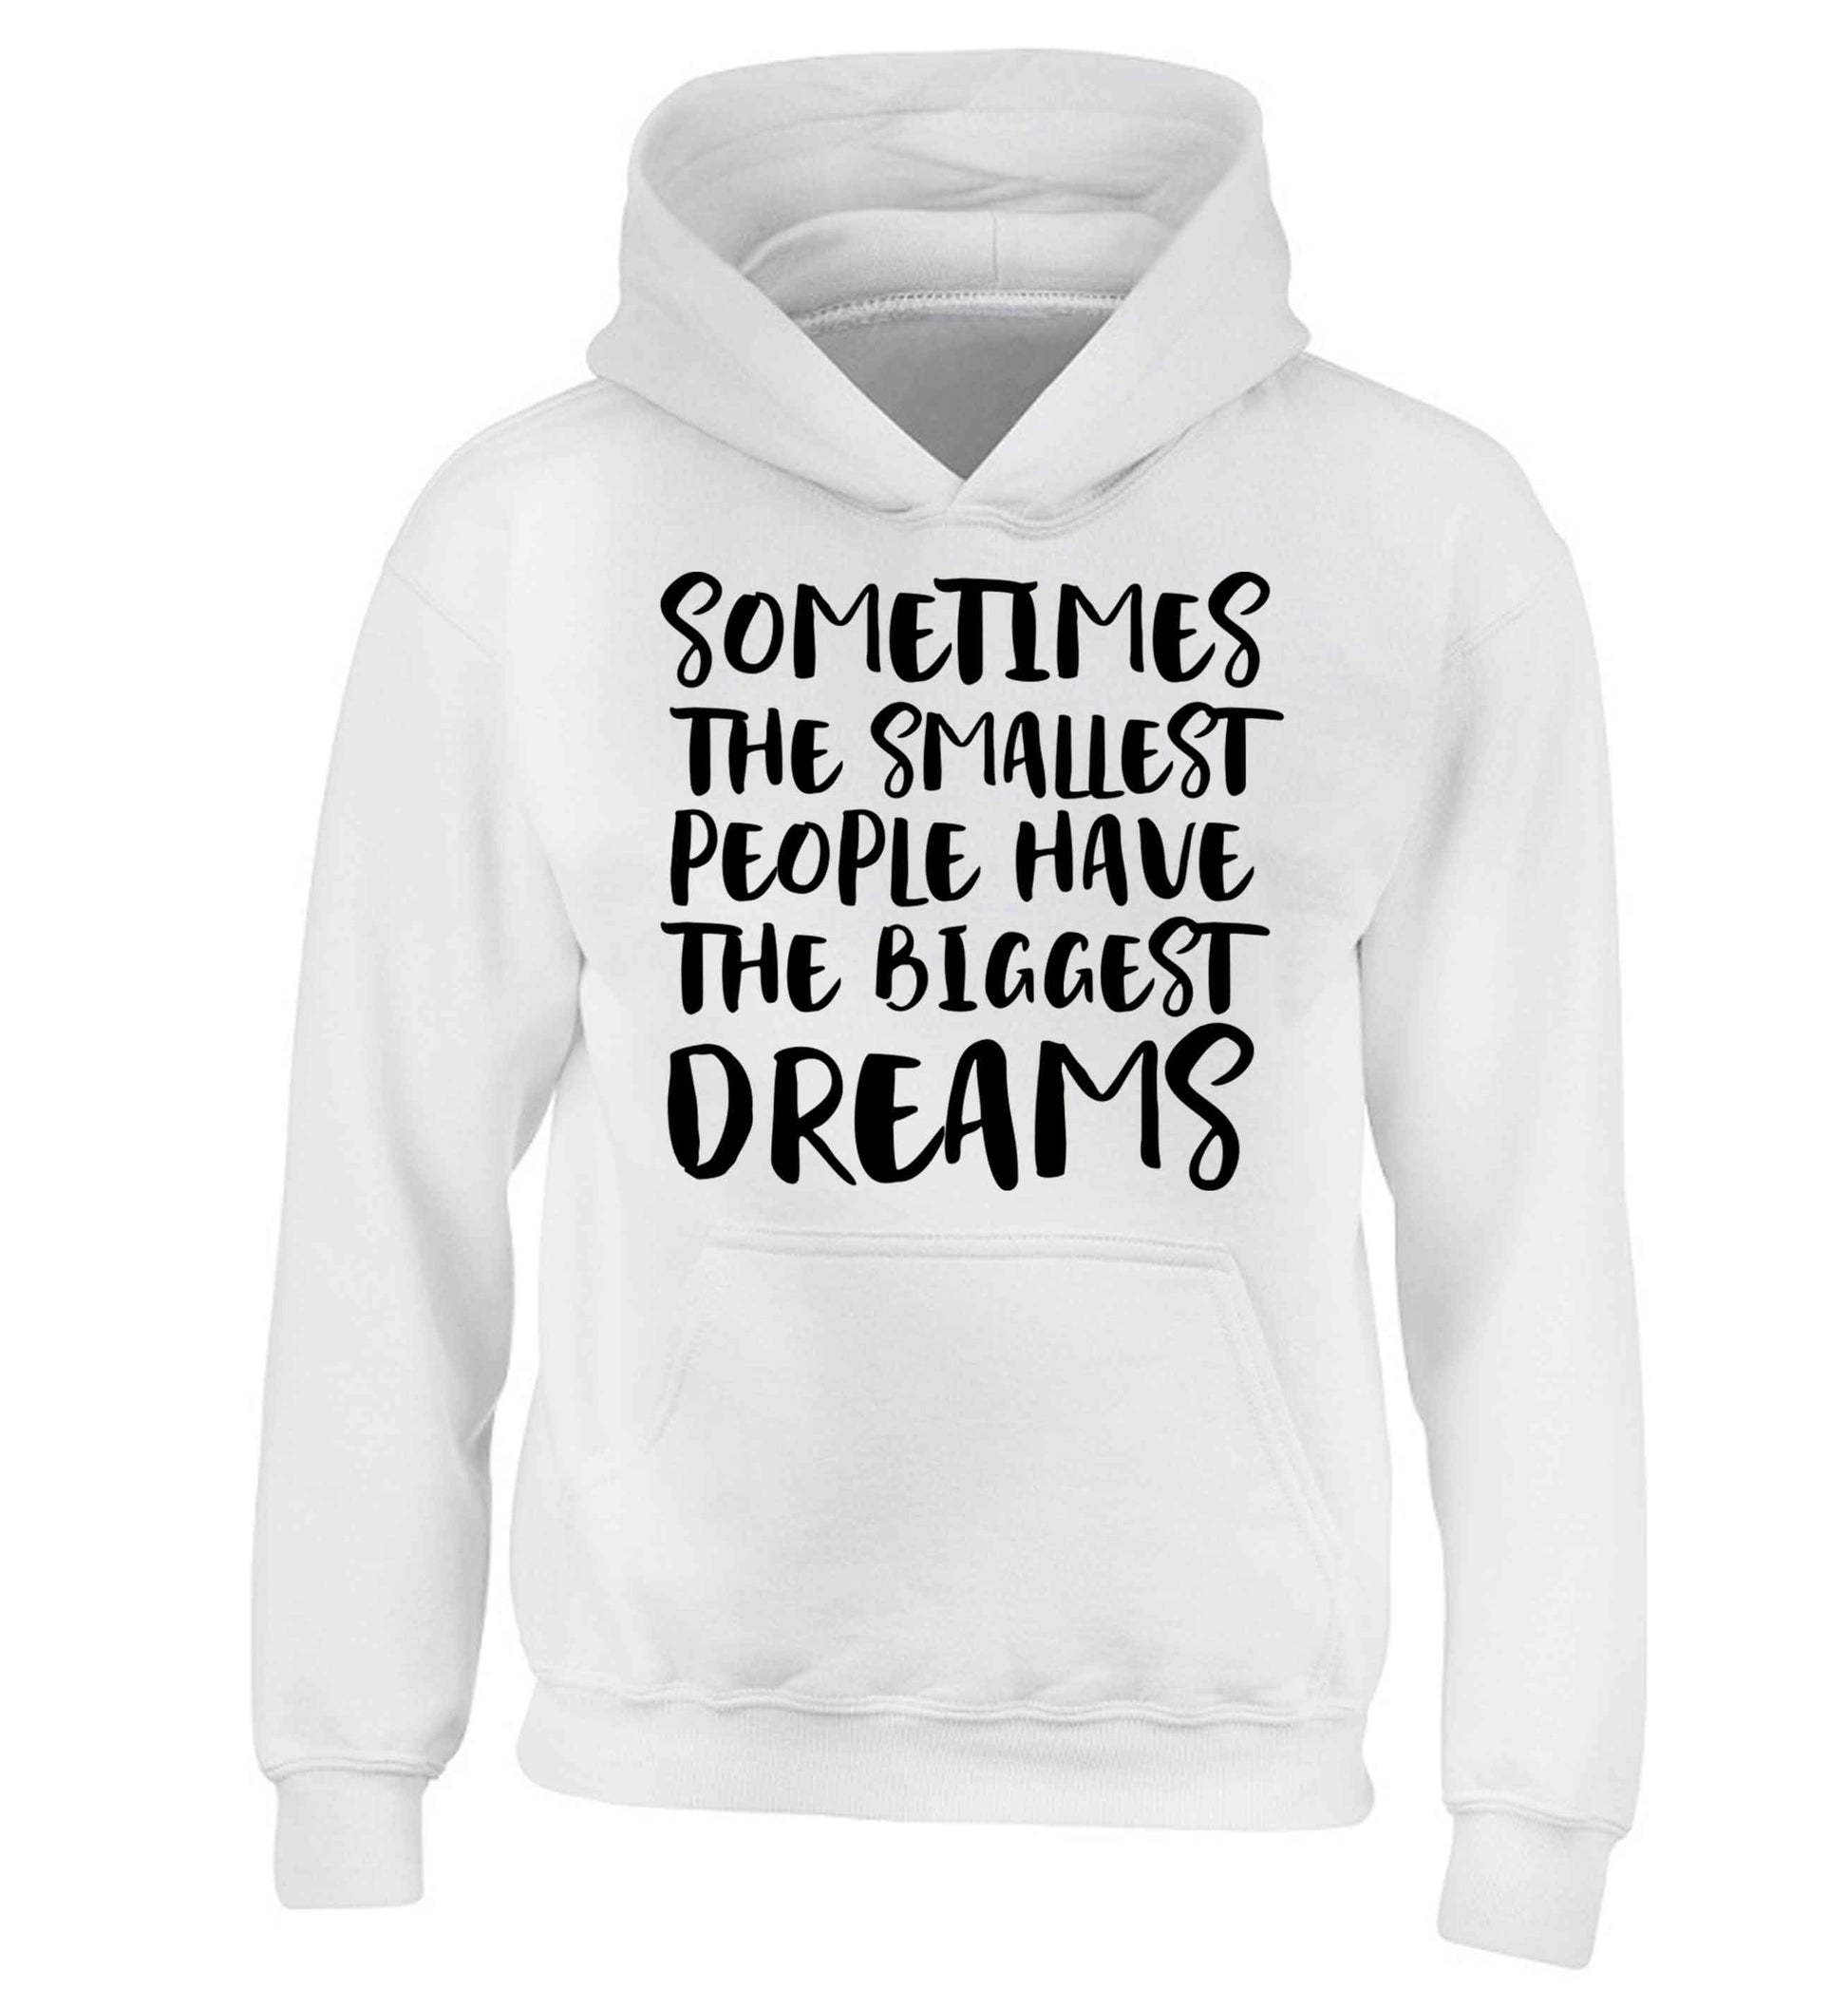 Sometimes the smallest people have the biggest dreams children's white hoodie 12-13 Years